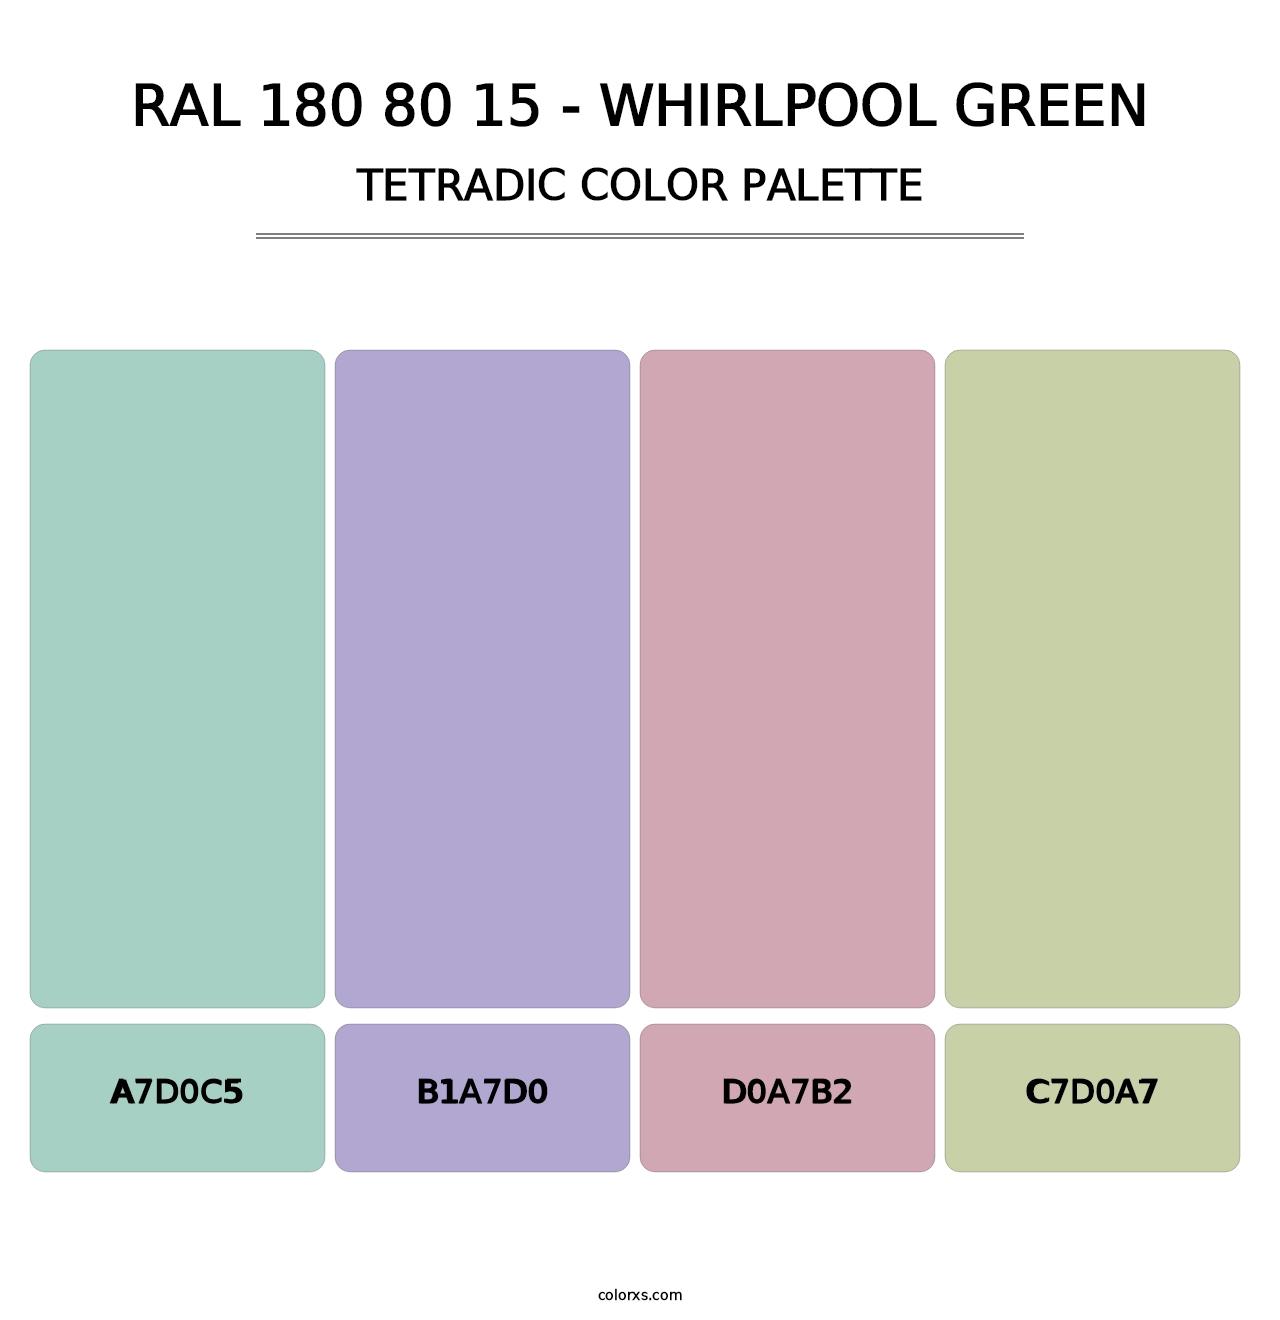 RAL 180 80 15 - Whirlpool Green - Tetradic Color Palette